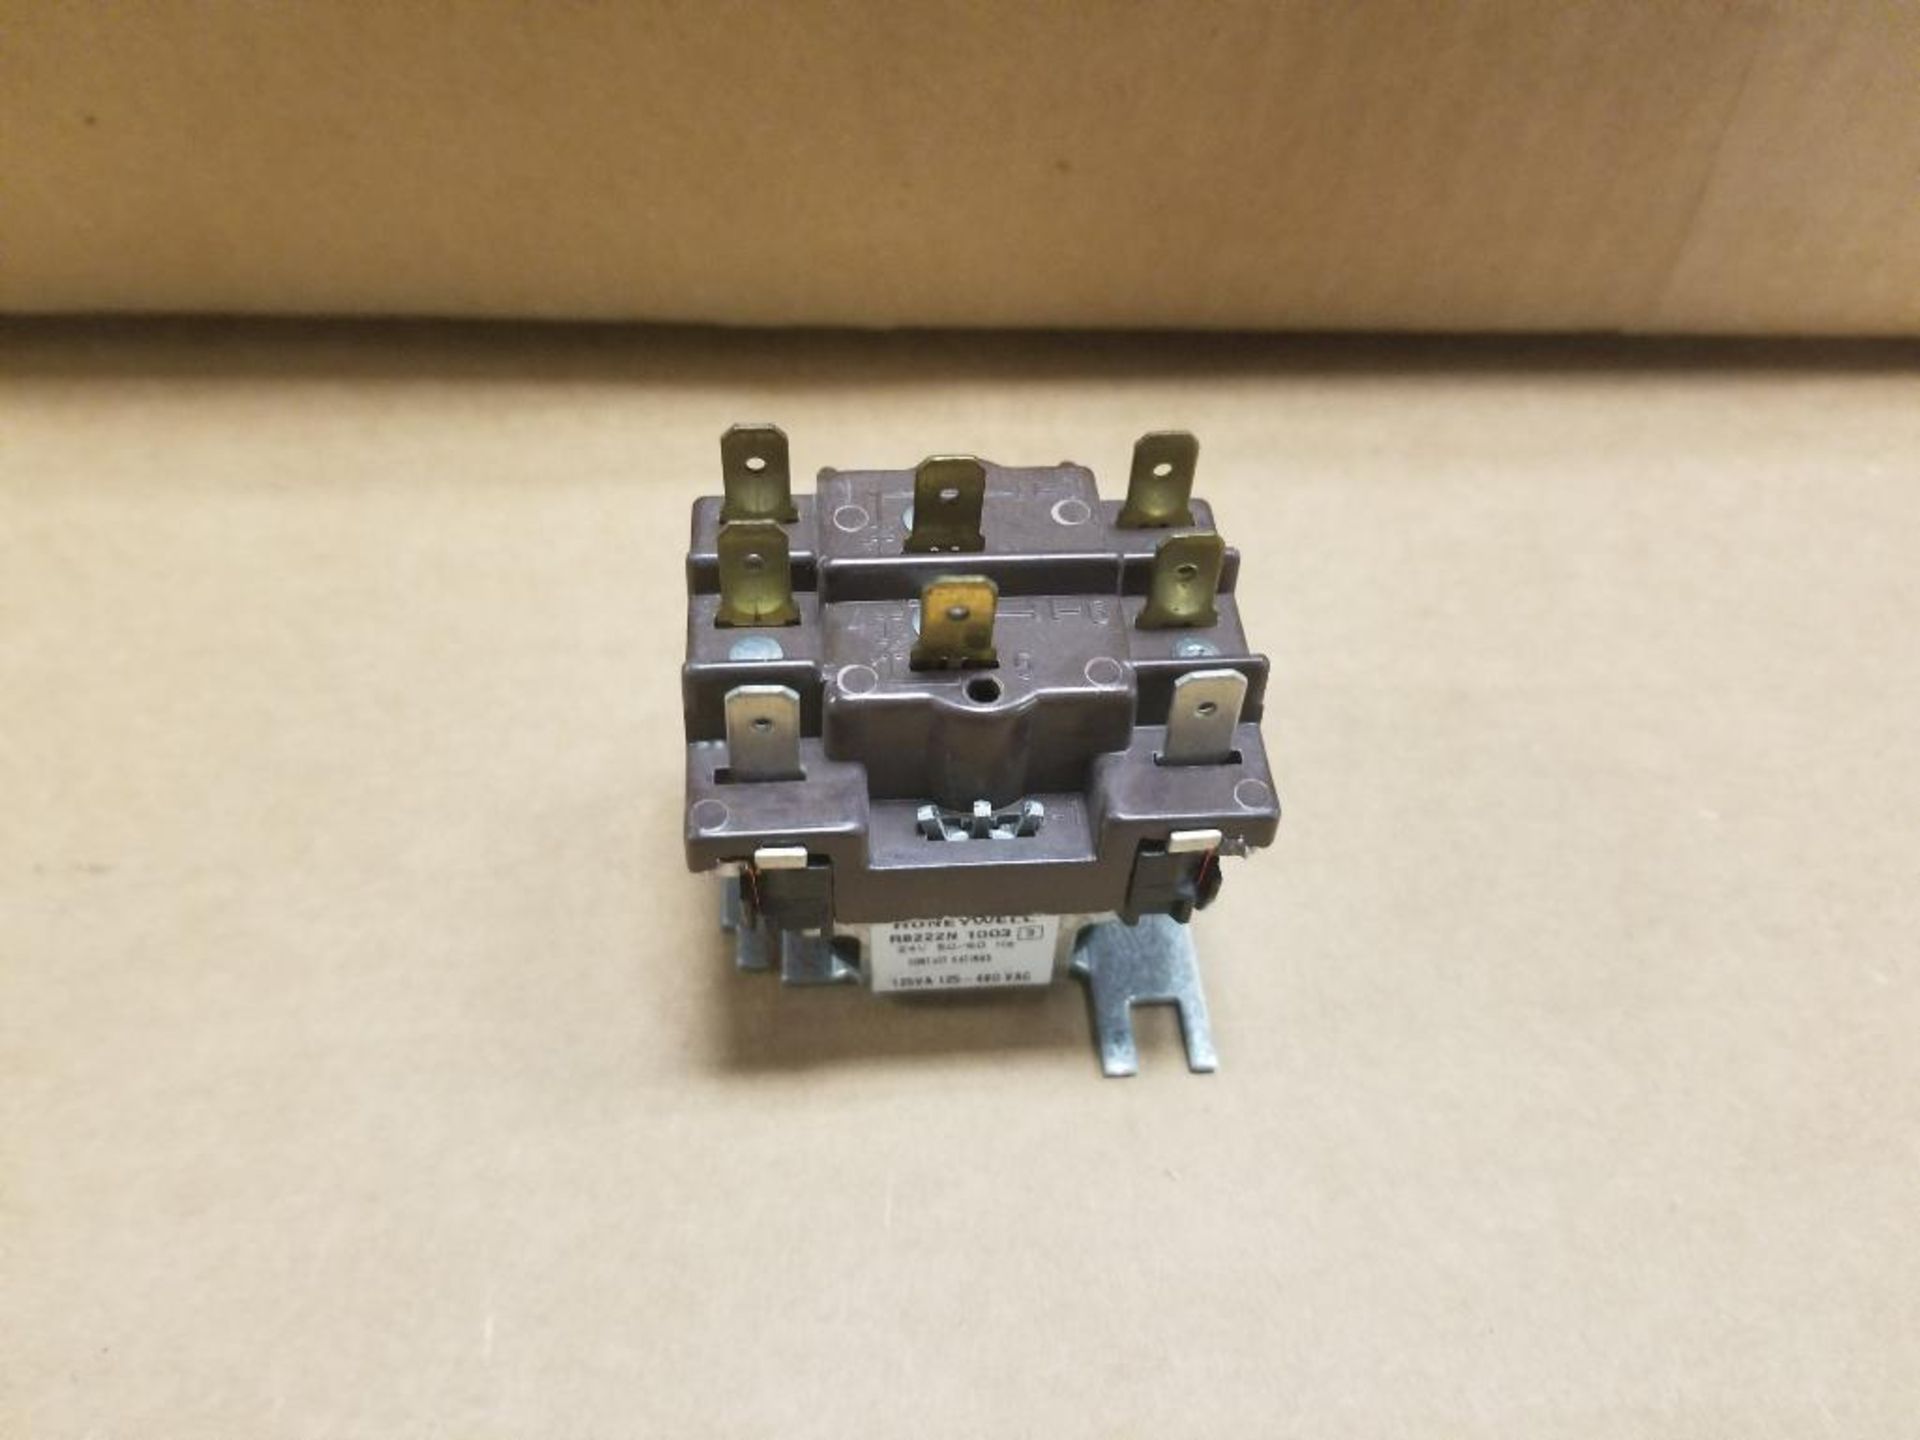 Qty 60 - Honeywell relay. Part number R8222N-1003. New in bulk box. - Image 3 of 5